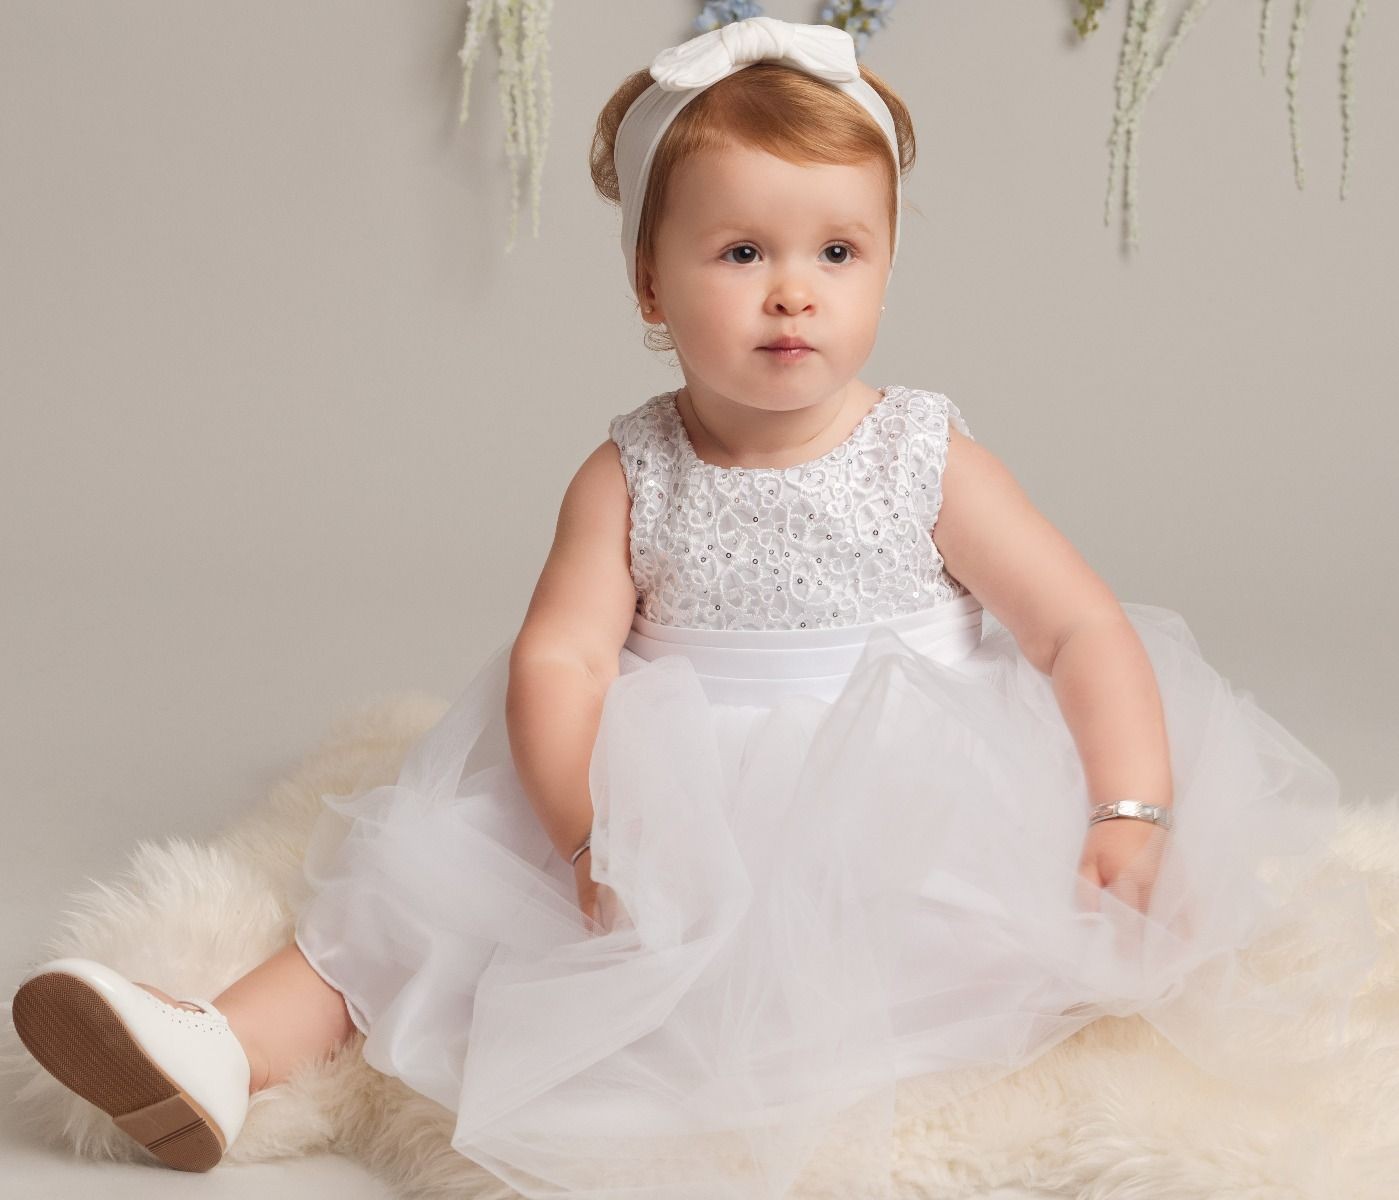 Baby Girls Dress with Floral Bodice & Bow - PC-1025 - Ivory